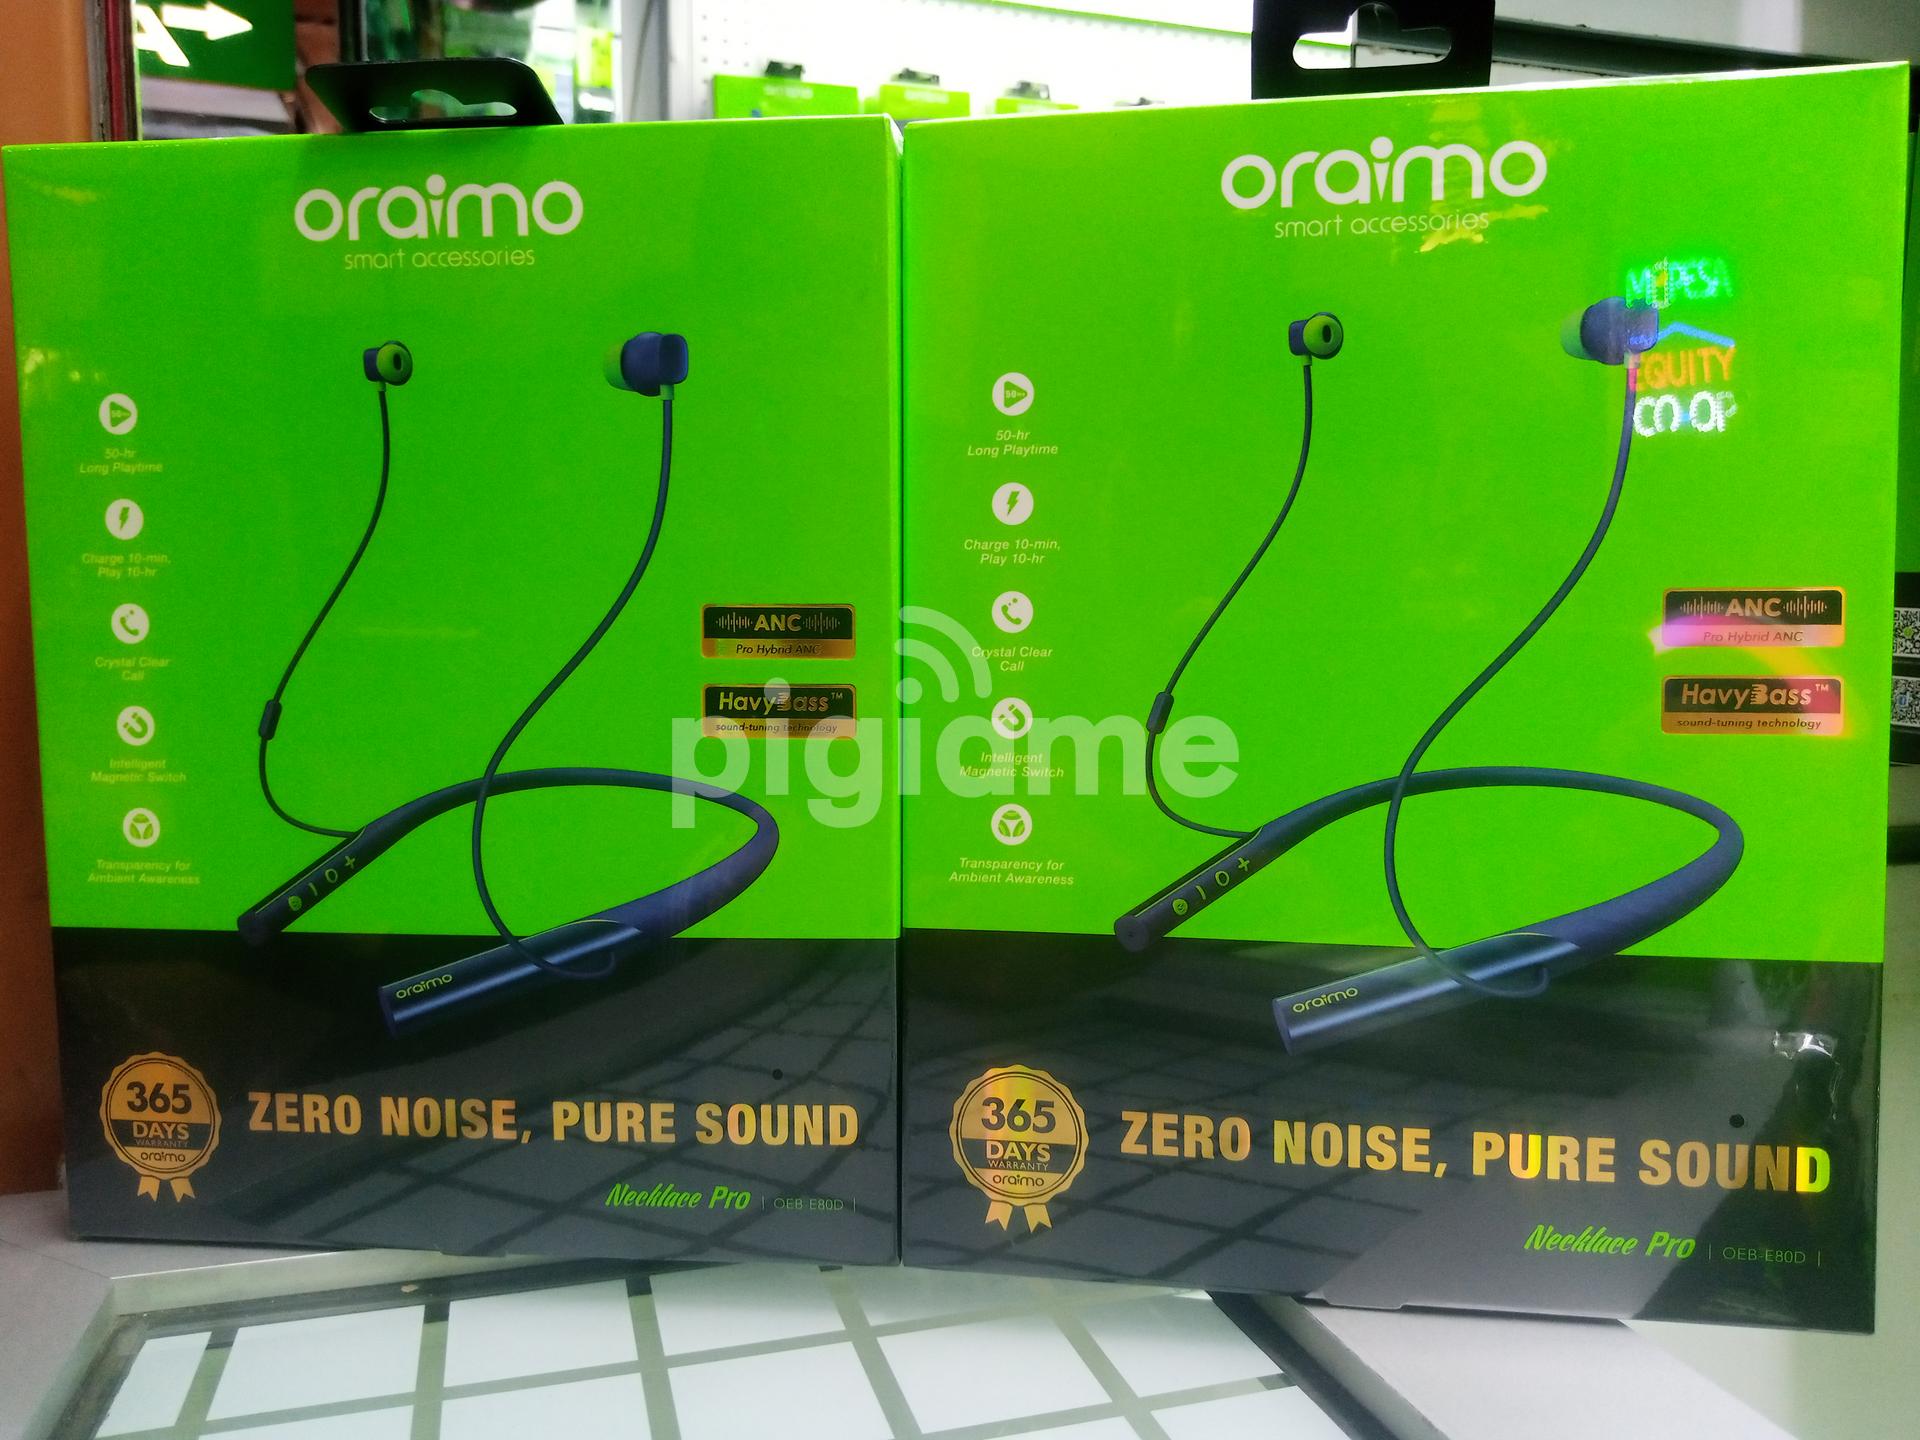 oraimo Necklace Pro HavyBass Hybrid ANC 50hr Playtime Clear Calls